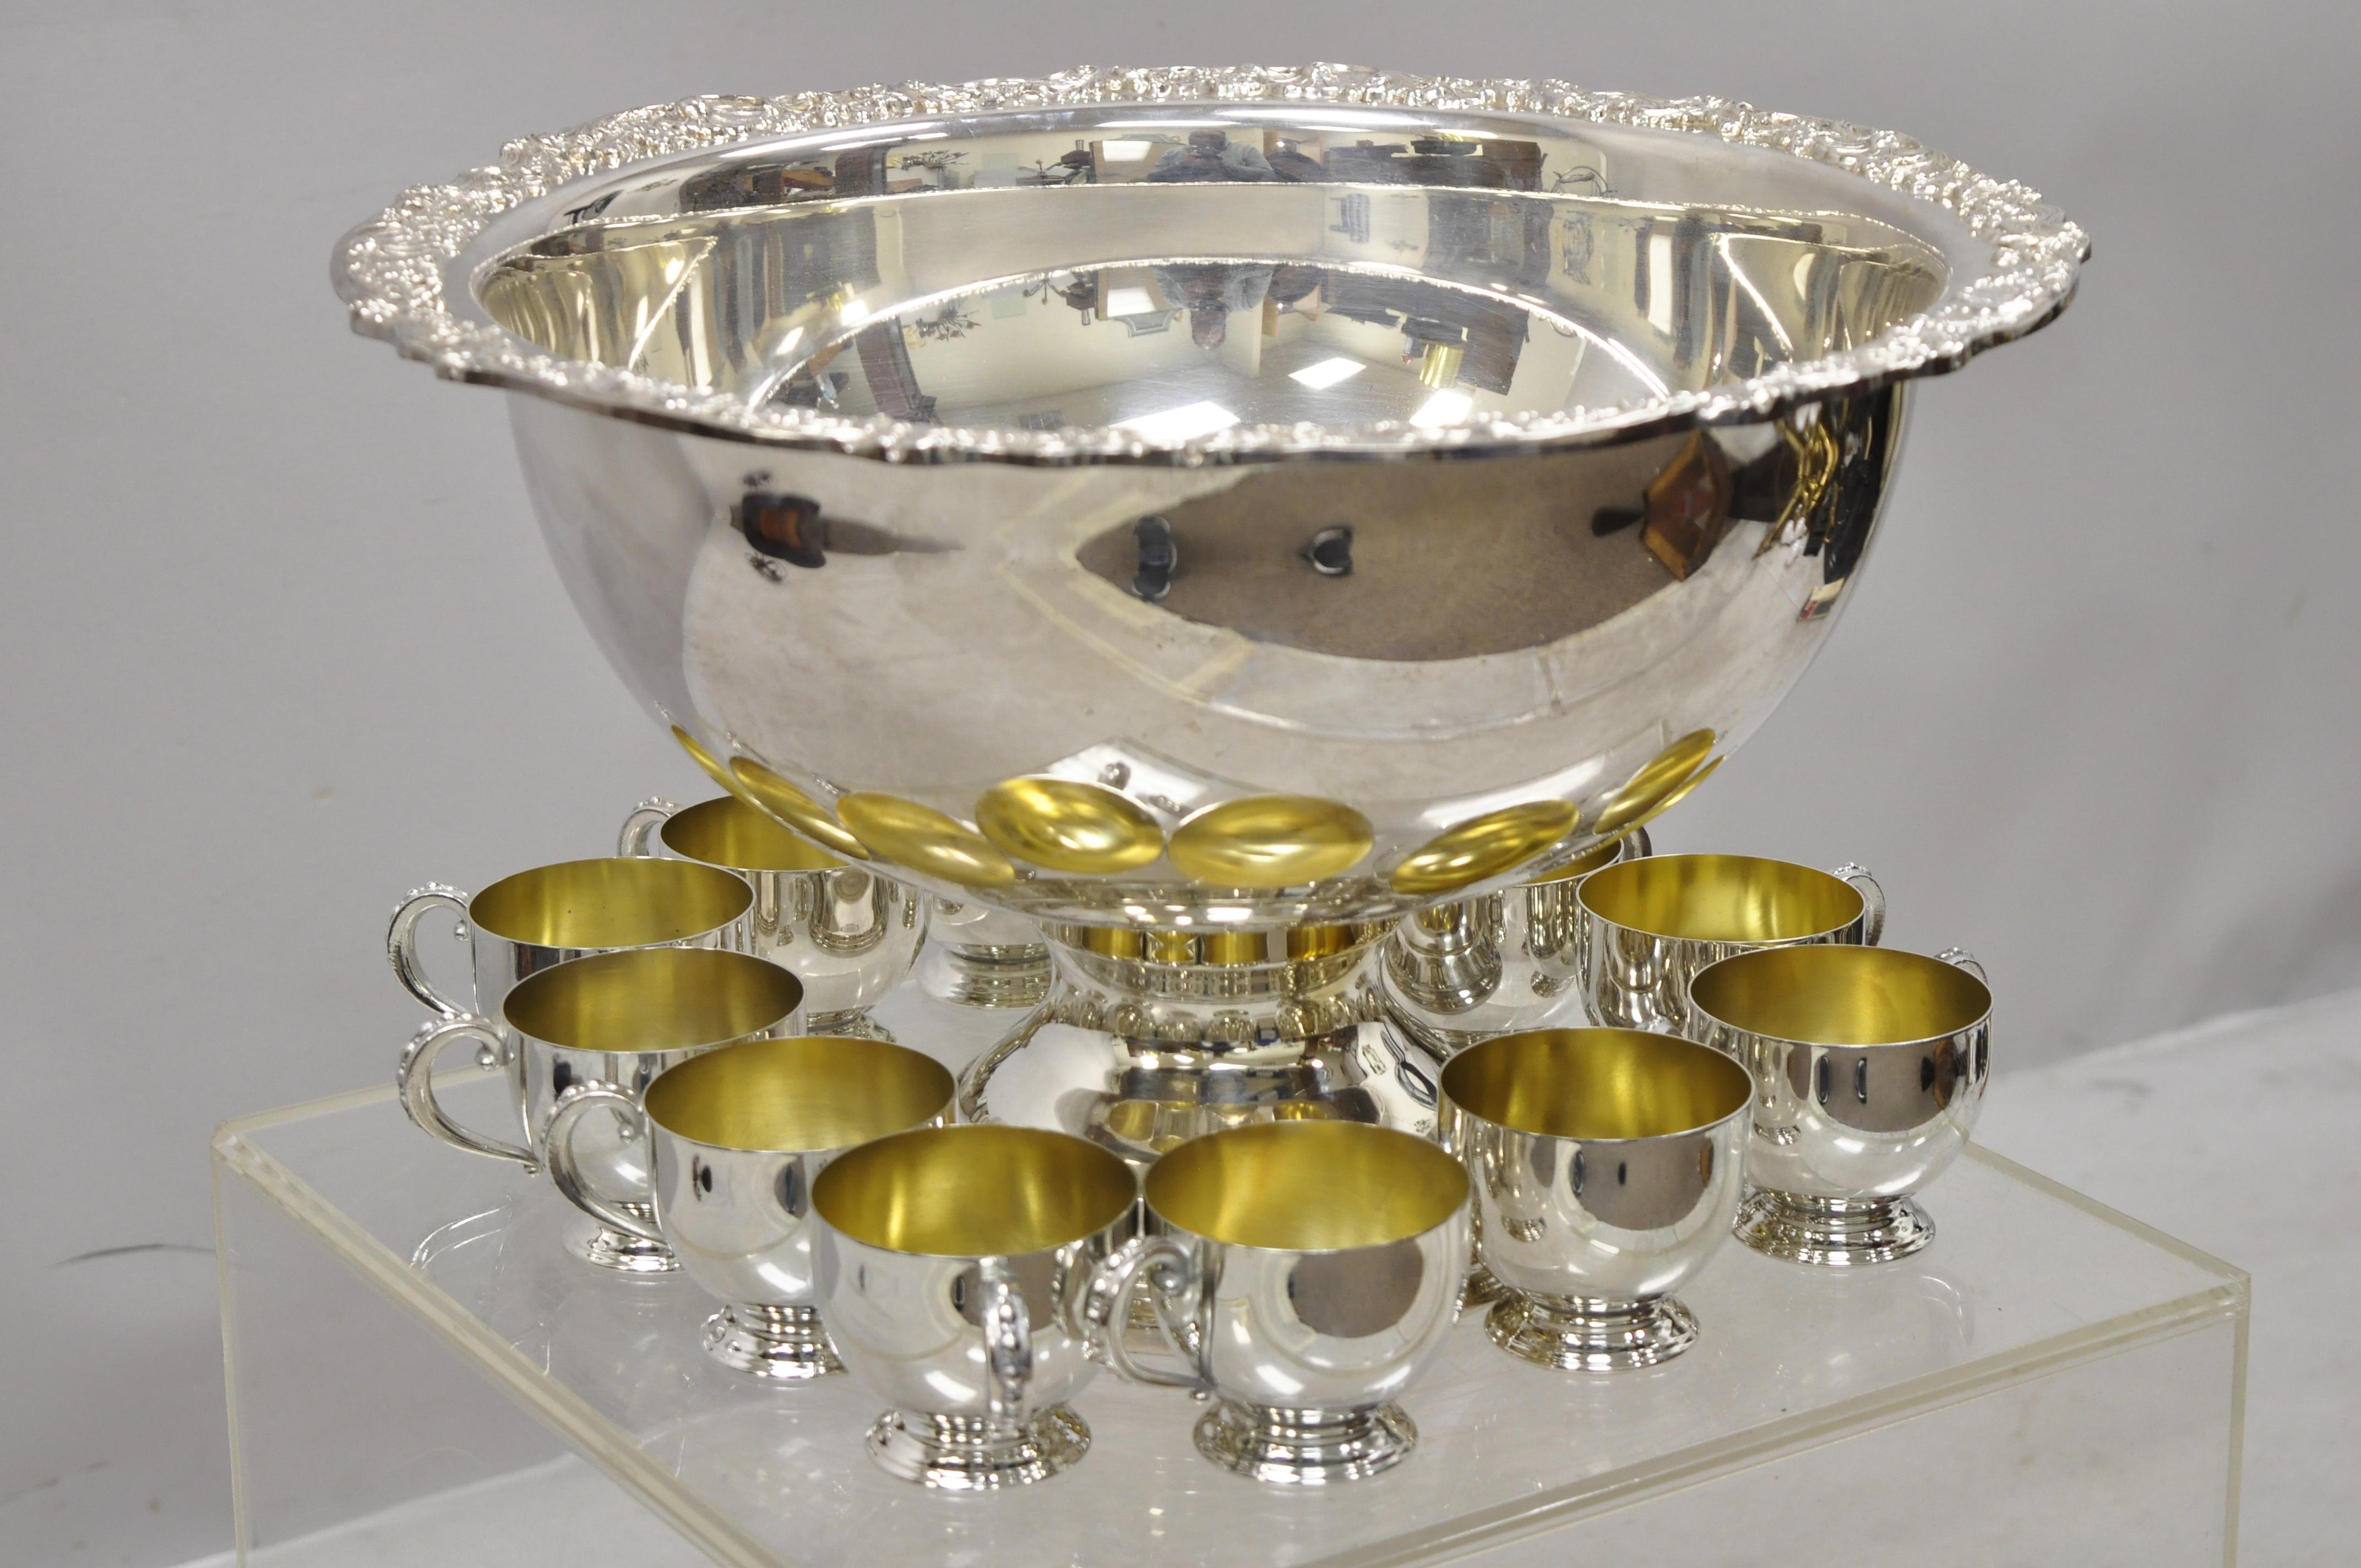 Towle Silver Plated Punch Bowl Set Flower Shell Rim with 12 Cups 4